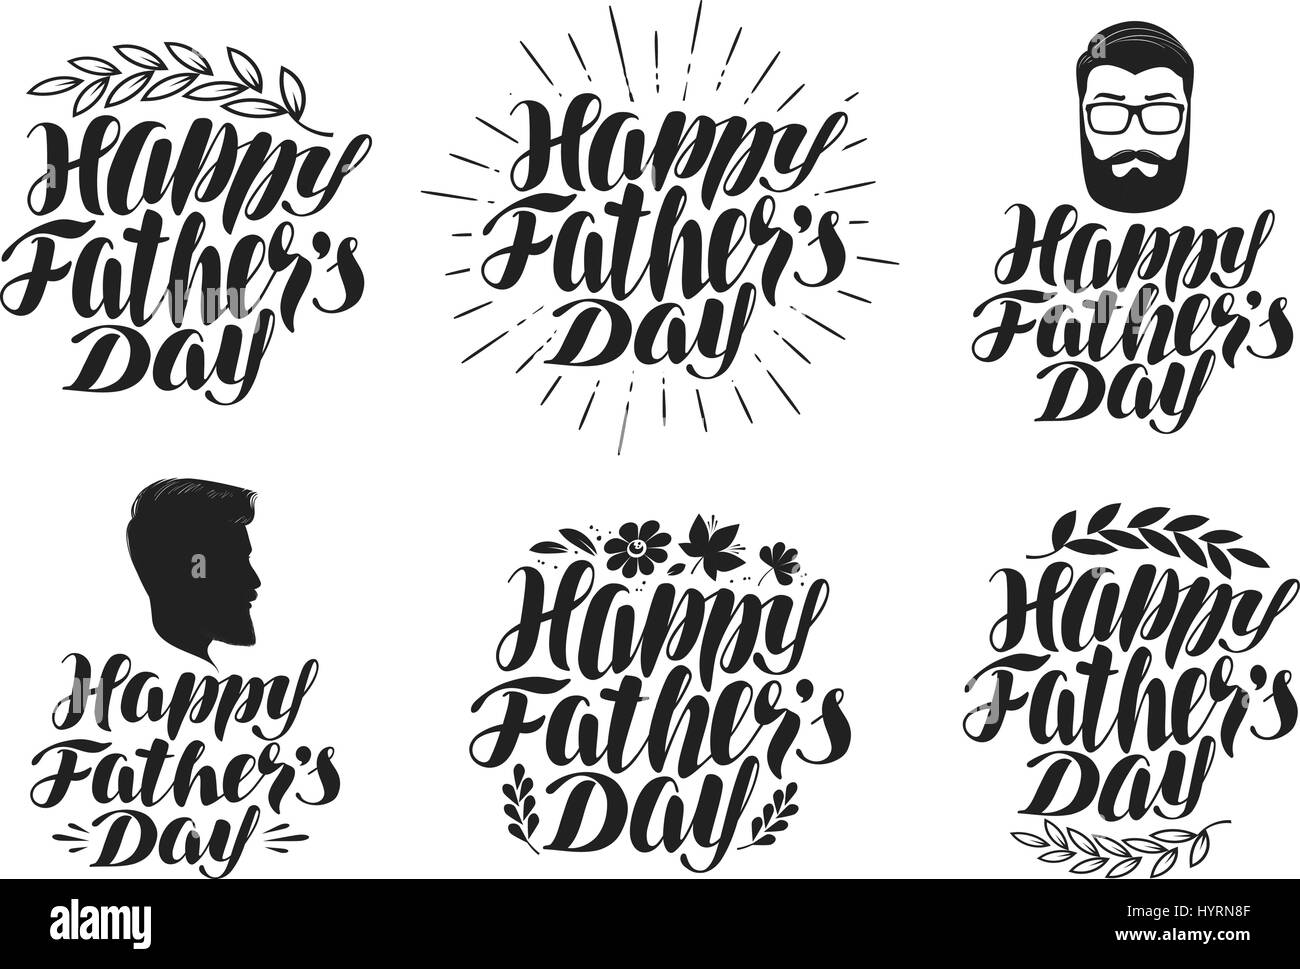 Happy fathers day baseball holiday graphic with handwritten style